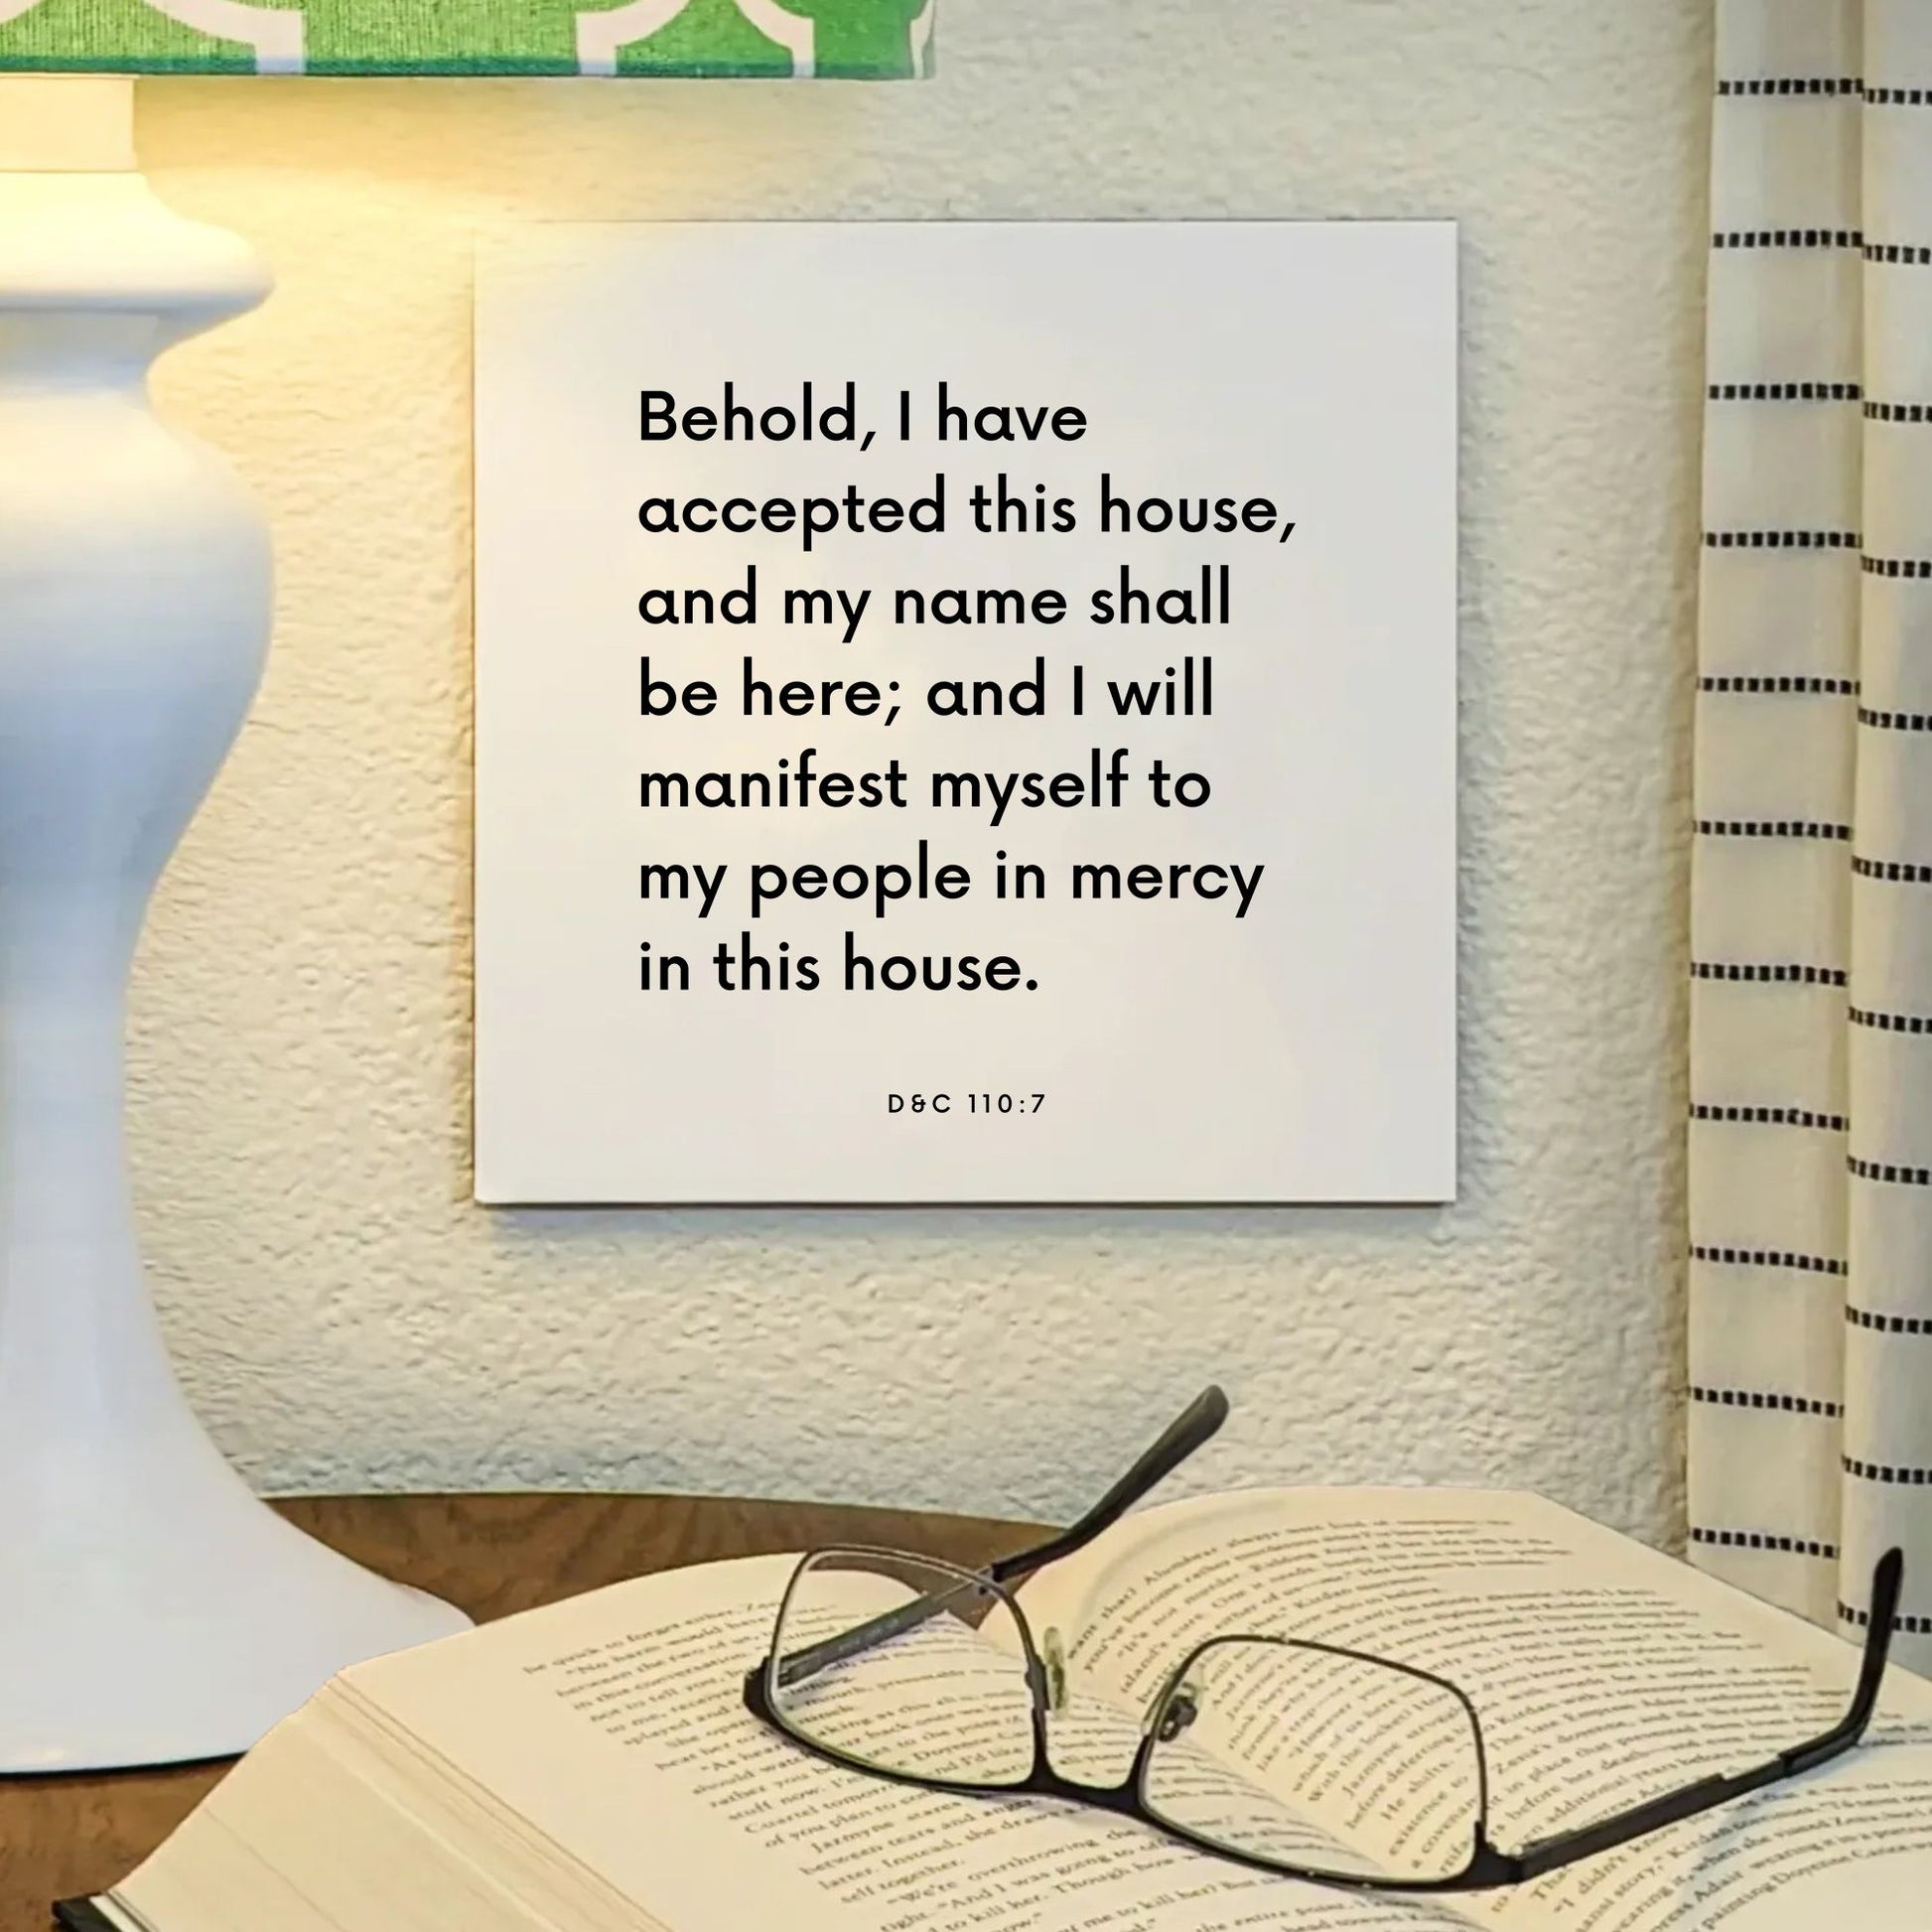 Lamp mouting of the scripture tile for D&C 110:7 - "I have accepted this house, and my name shall be here"